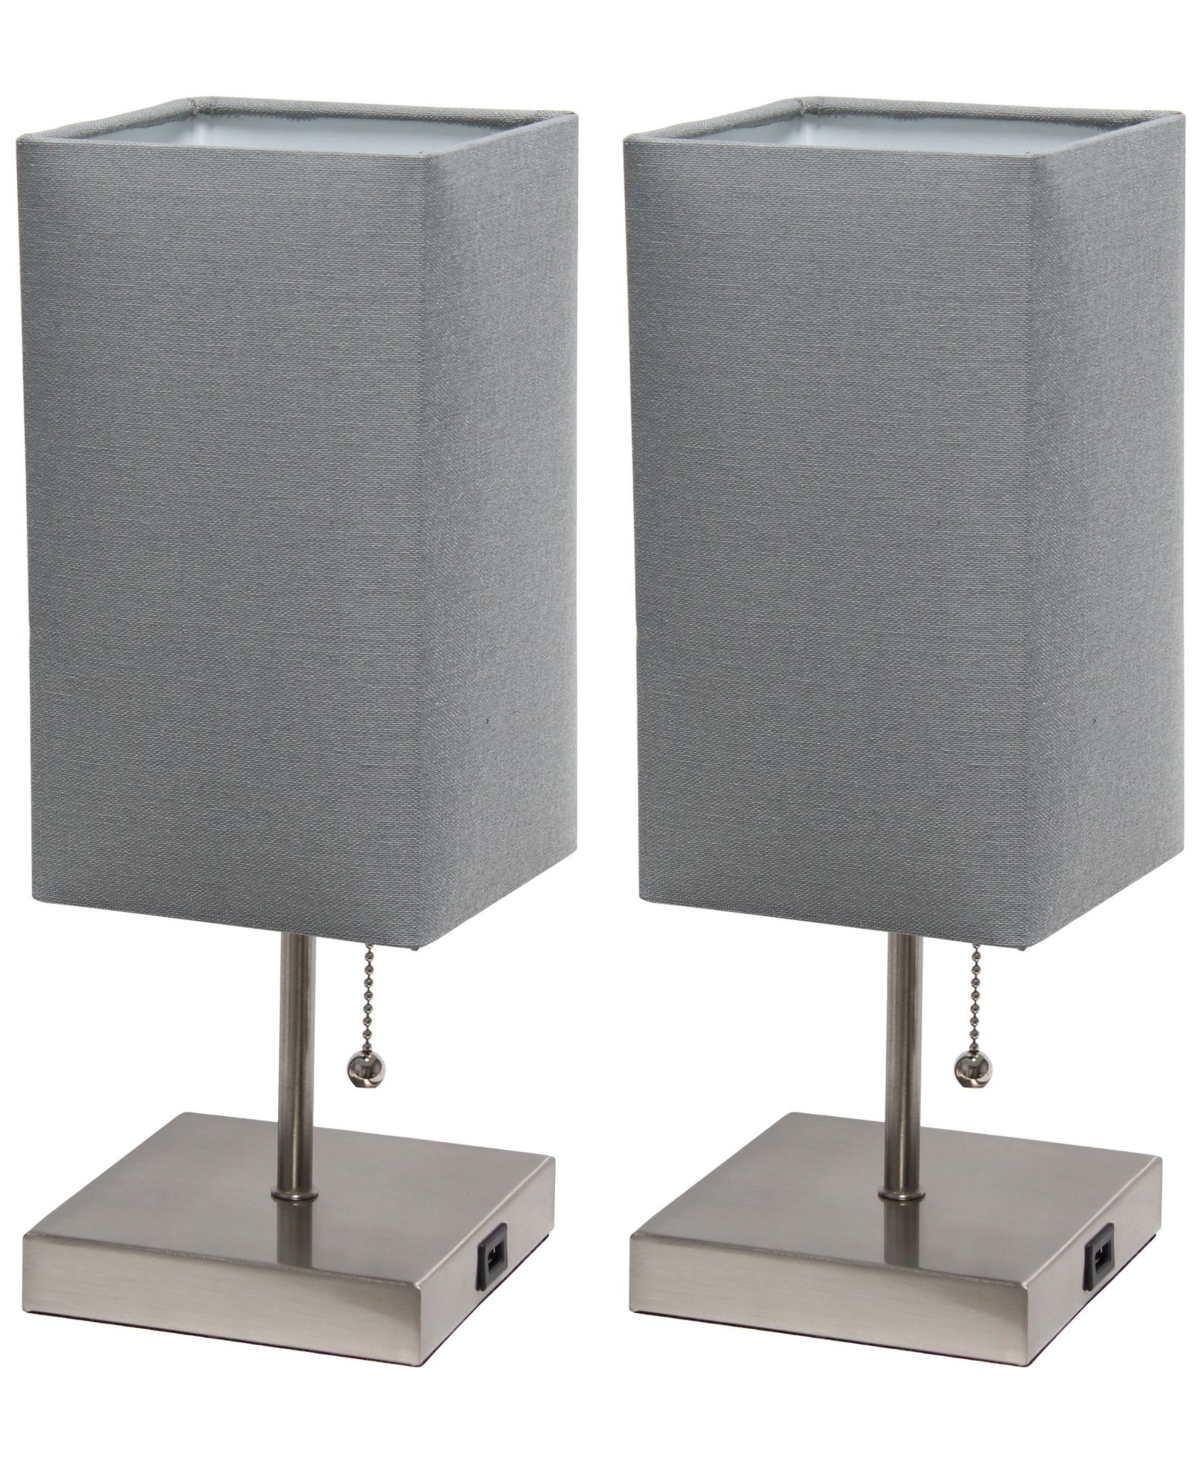 Simple Designs Petite Stick Lamp With Usb Charging Port, Set Of 2 In Gray Shade,brushed Nickel Base